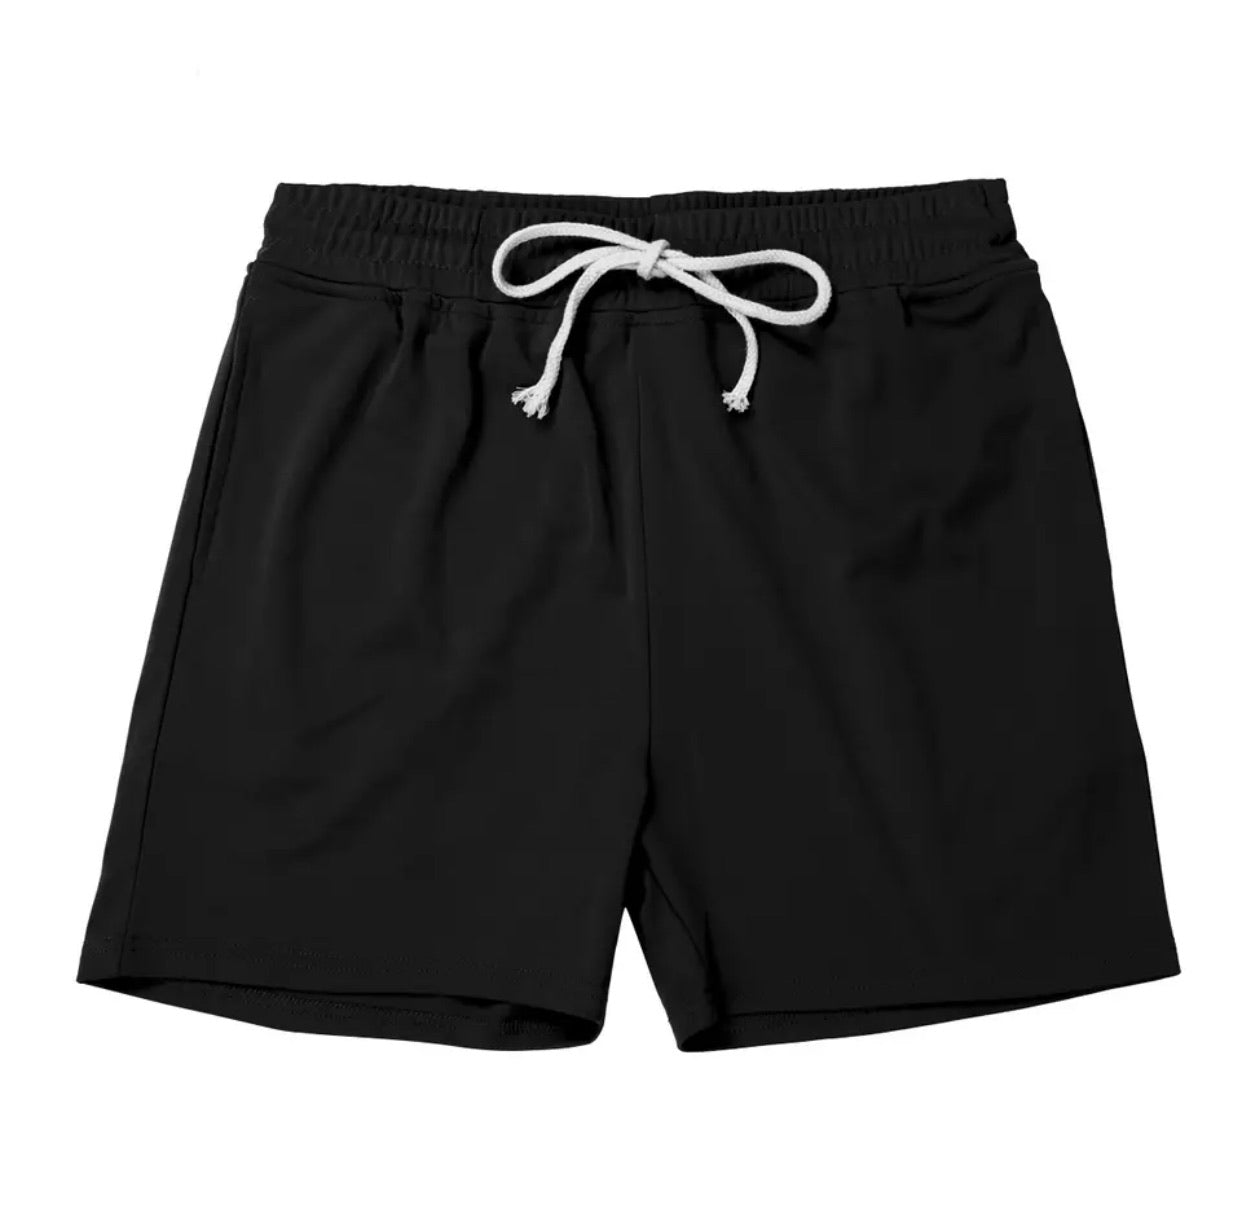 The 5” Organic Short - Limited Stock & Sizes